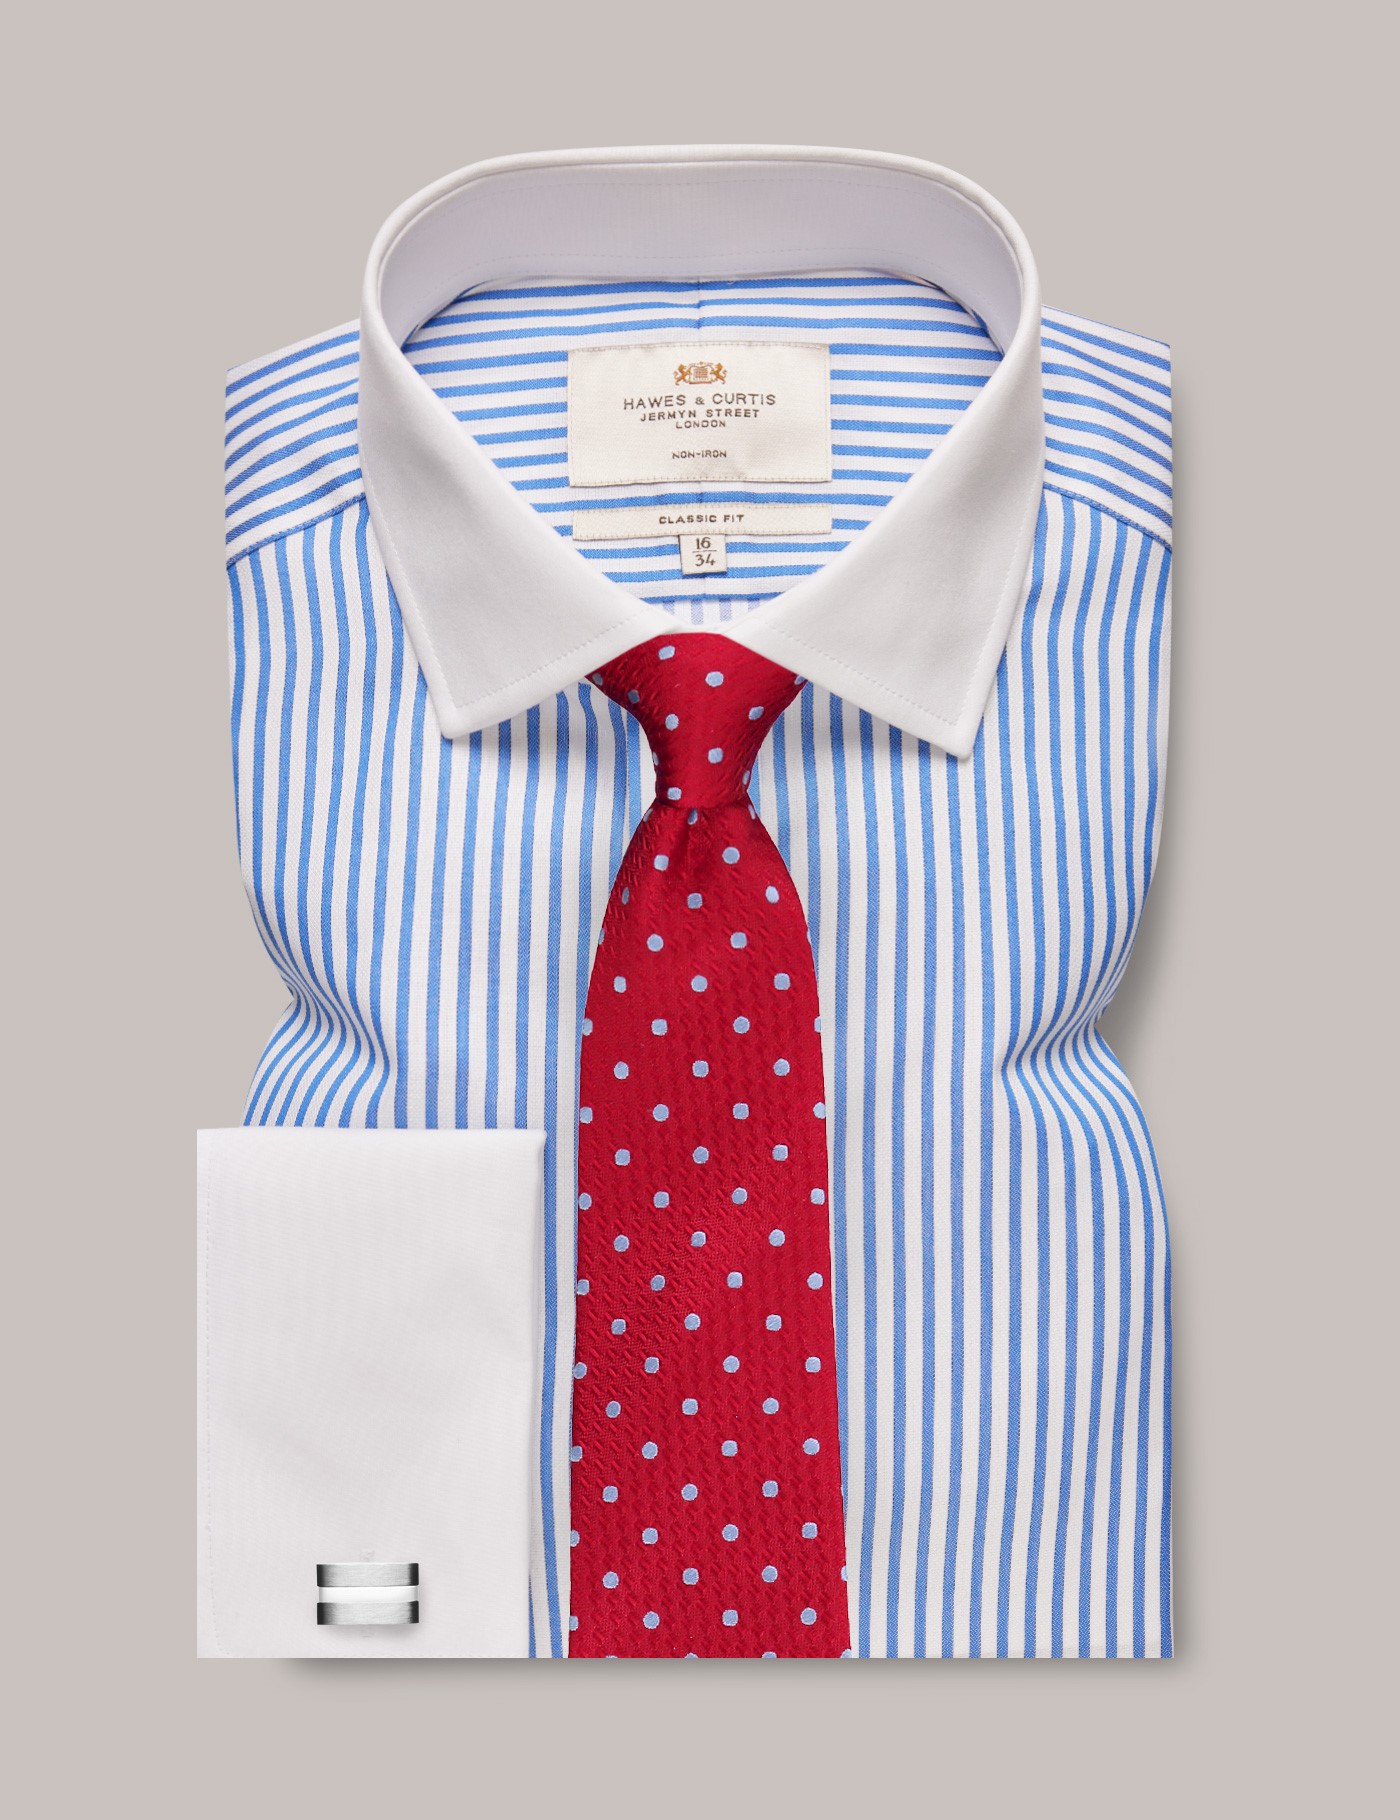 Hawes & Curtis Non-Iron Royal Blue & White Stripe Classic Fit Shirt With White Collar And Cuffs